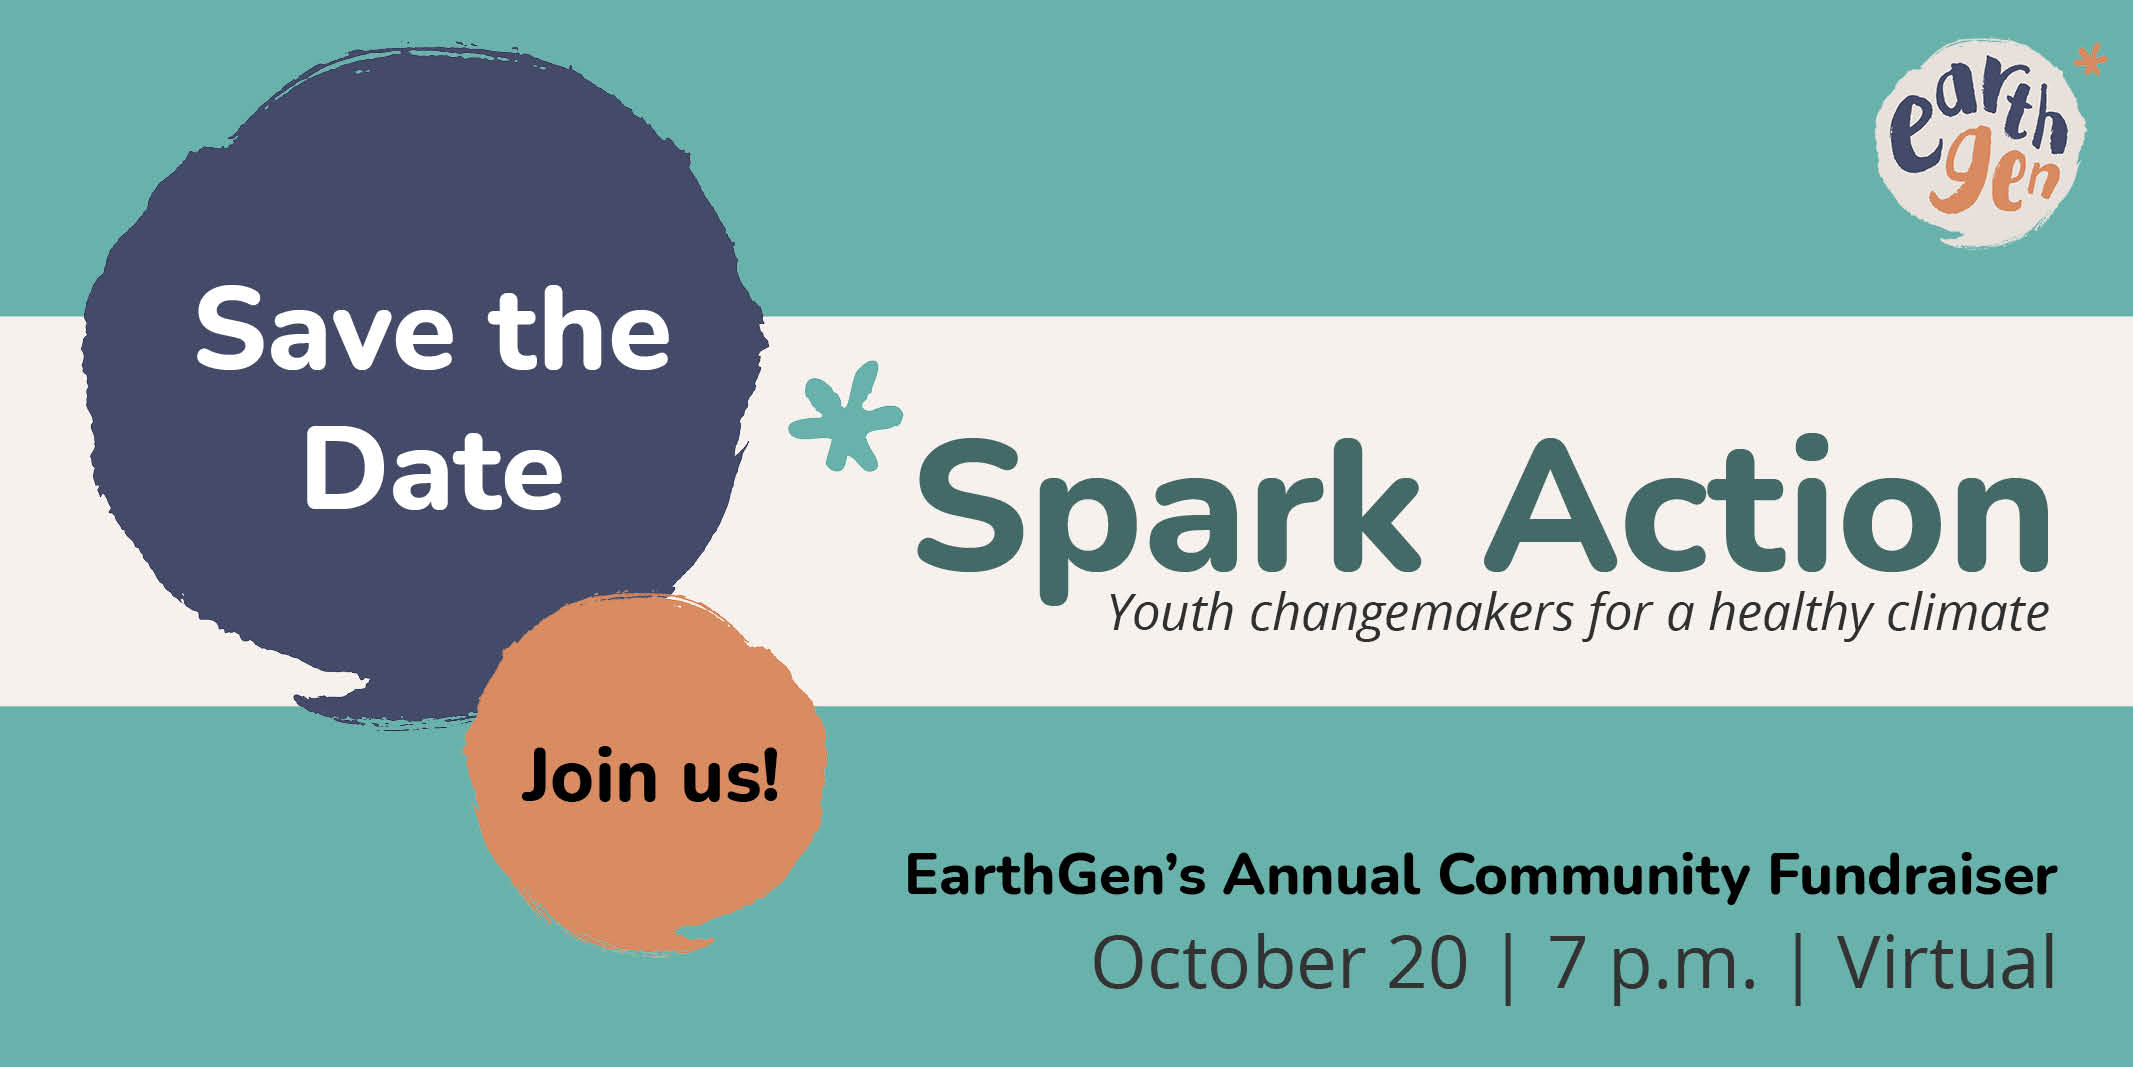 Save the Date. Spark Action: Youth Changemakers for a healthy climate. EarthGen's Annual Community Fundraiser | October 20 | 7 p.m. | Virtual | Join Us!